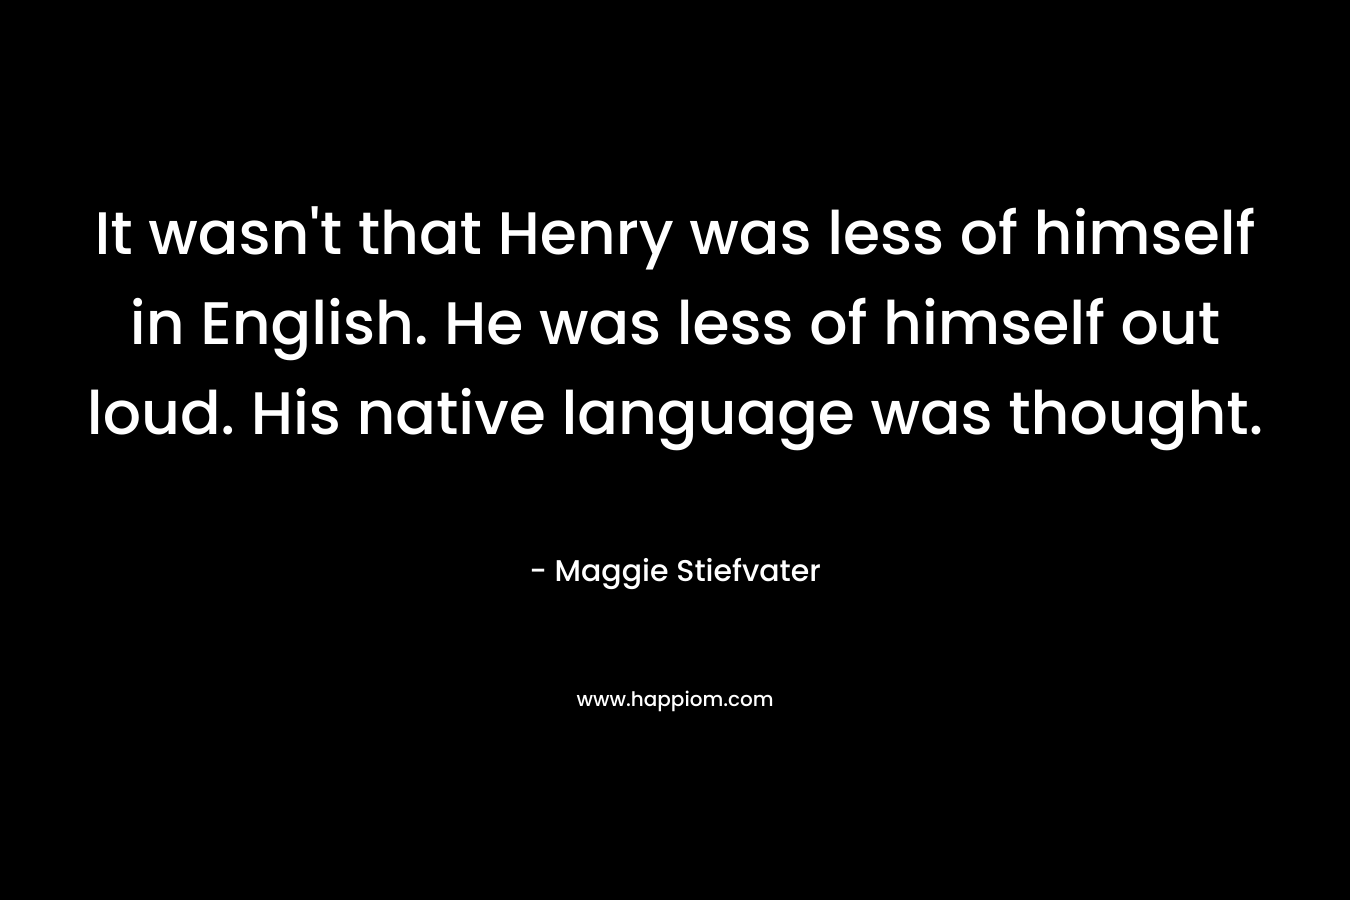 It wasn’t that Henry was less of himself in English. He was less of himself out loud. His native language was thought. – Maggie Stiefvater